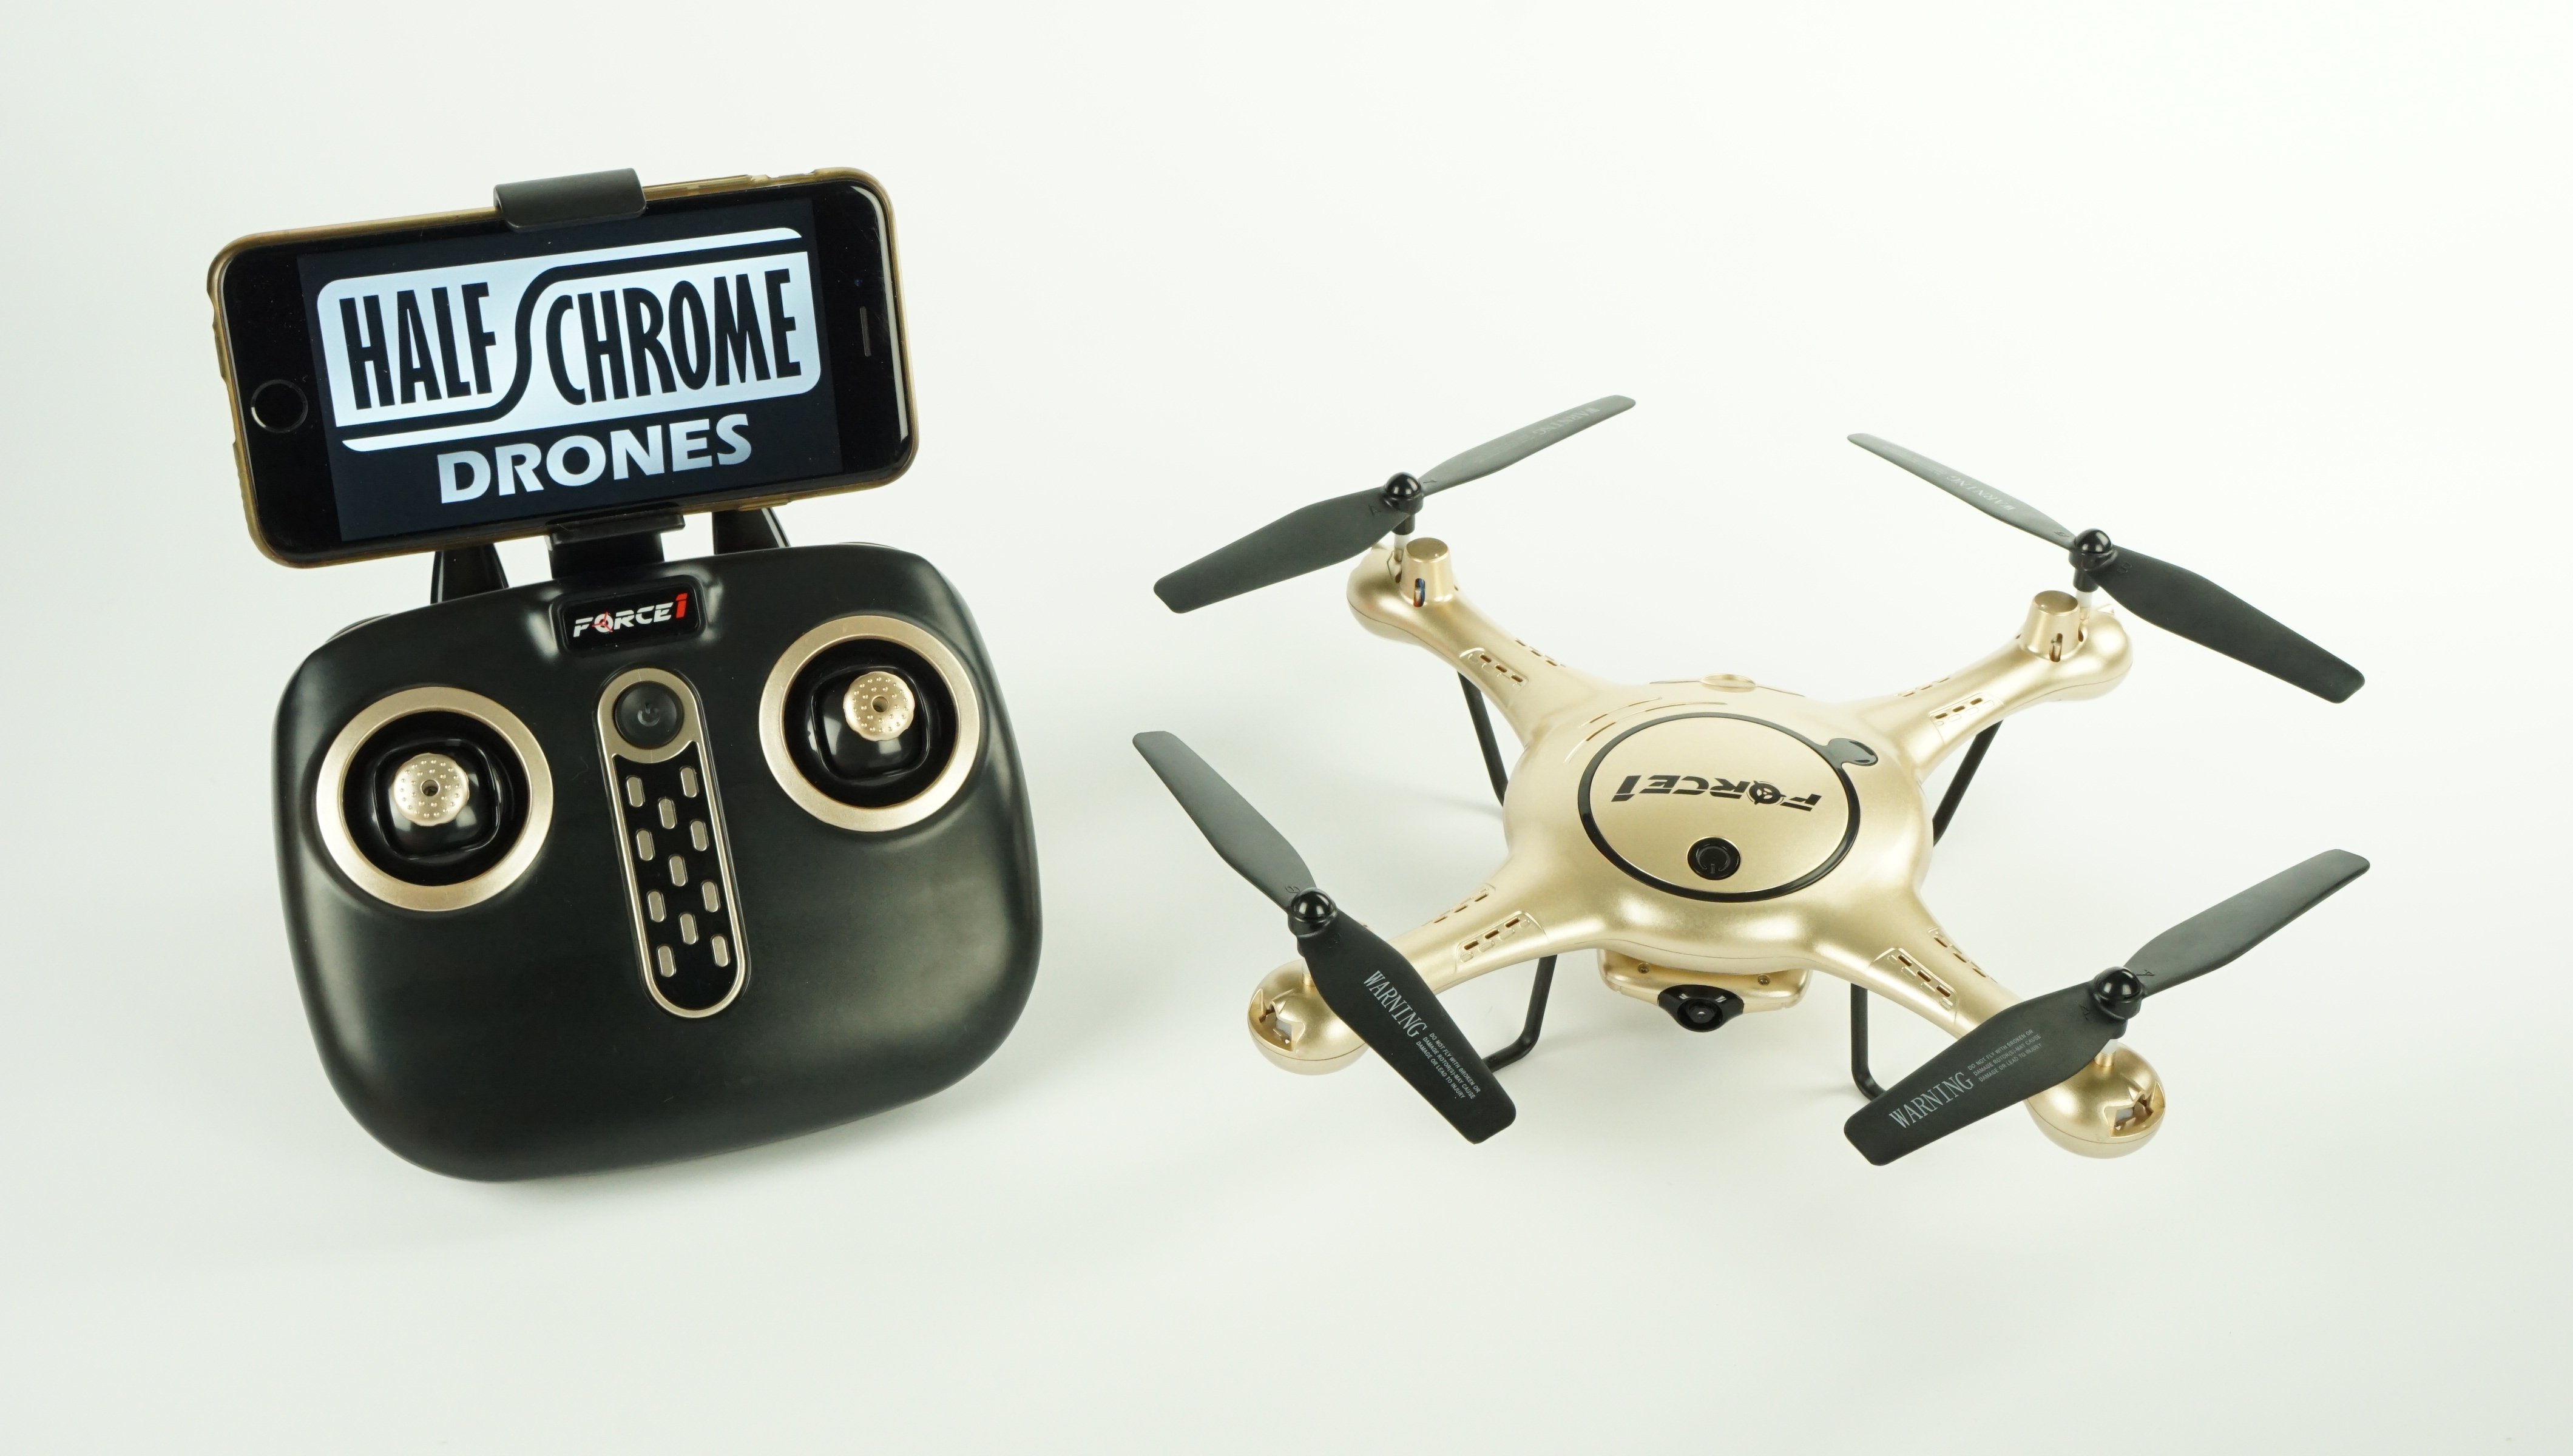 Thunderbolt: A Top Drone with Features